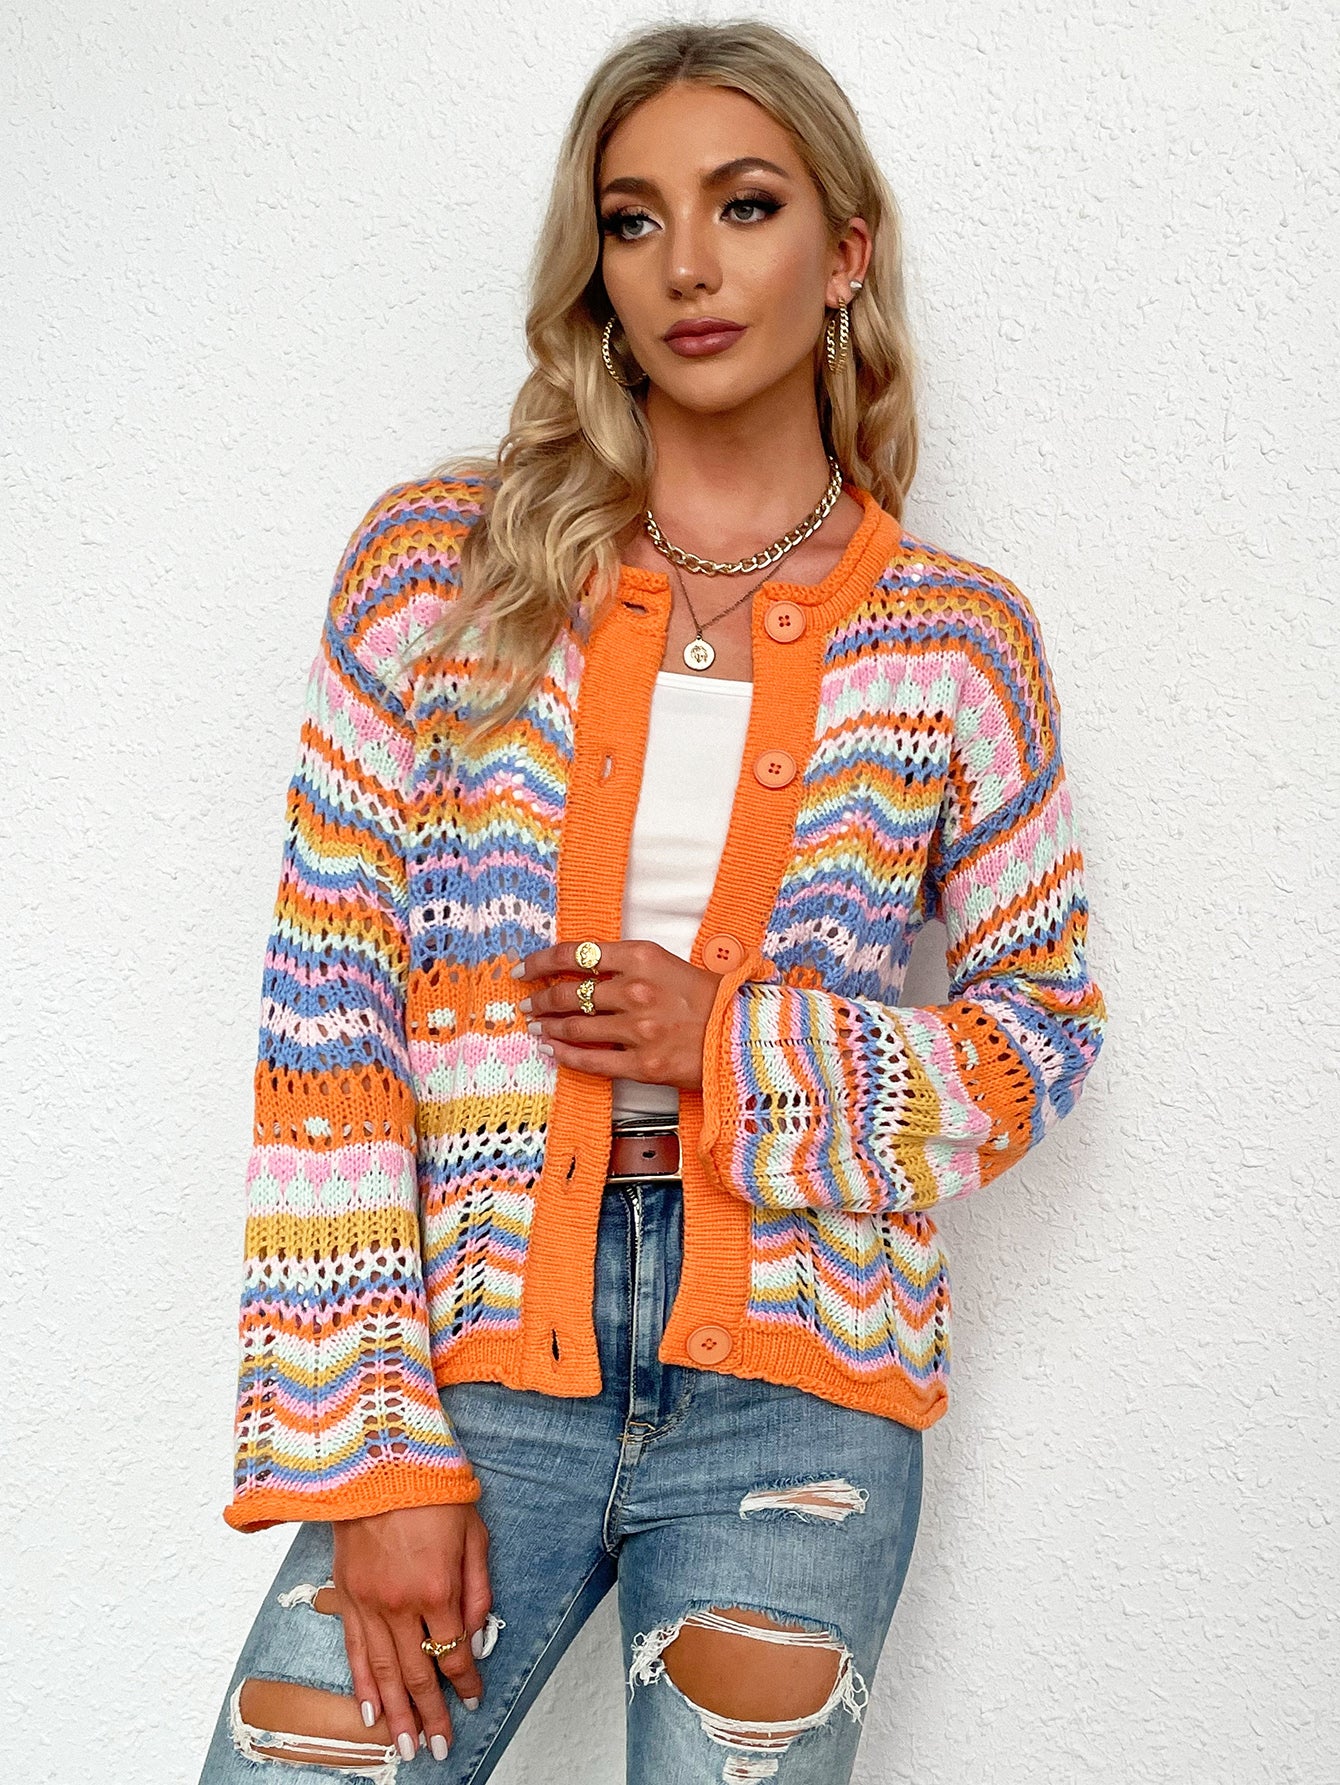 Elevate your style with our Chevron Stripes Cardigans. Discover chic and cozy fashion in our collection of women's striped cardigans designed for a versatile and comfortable look.